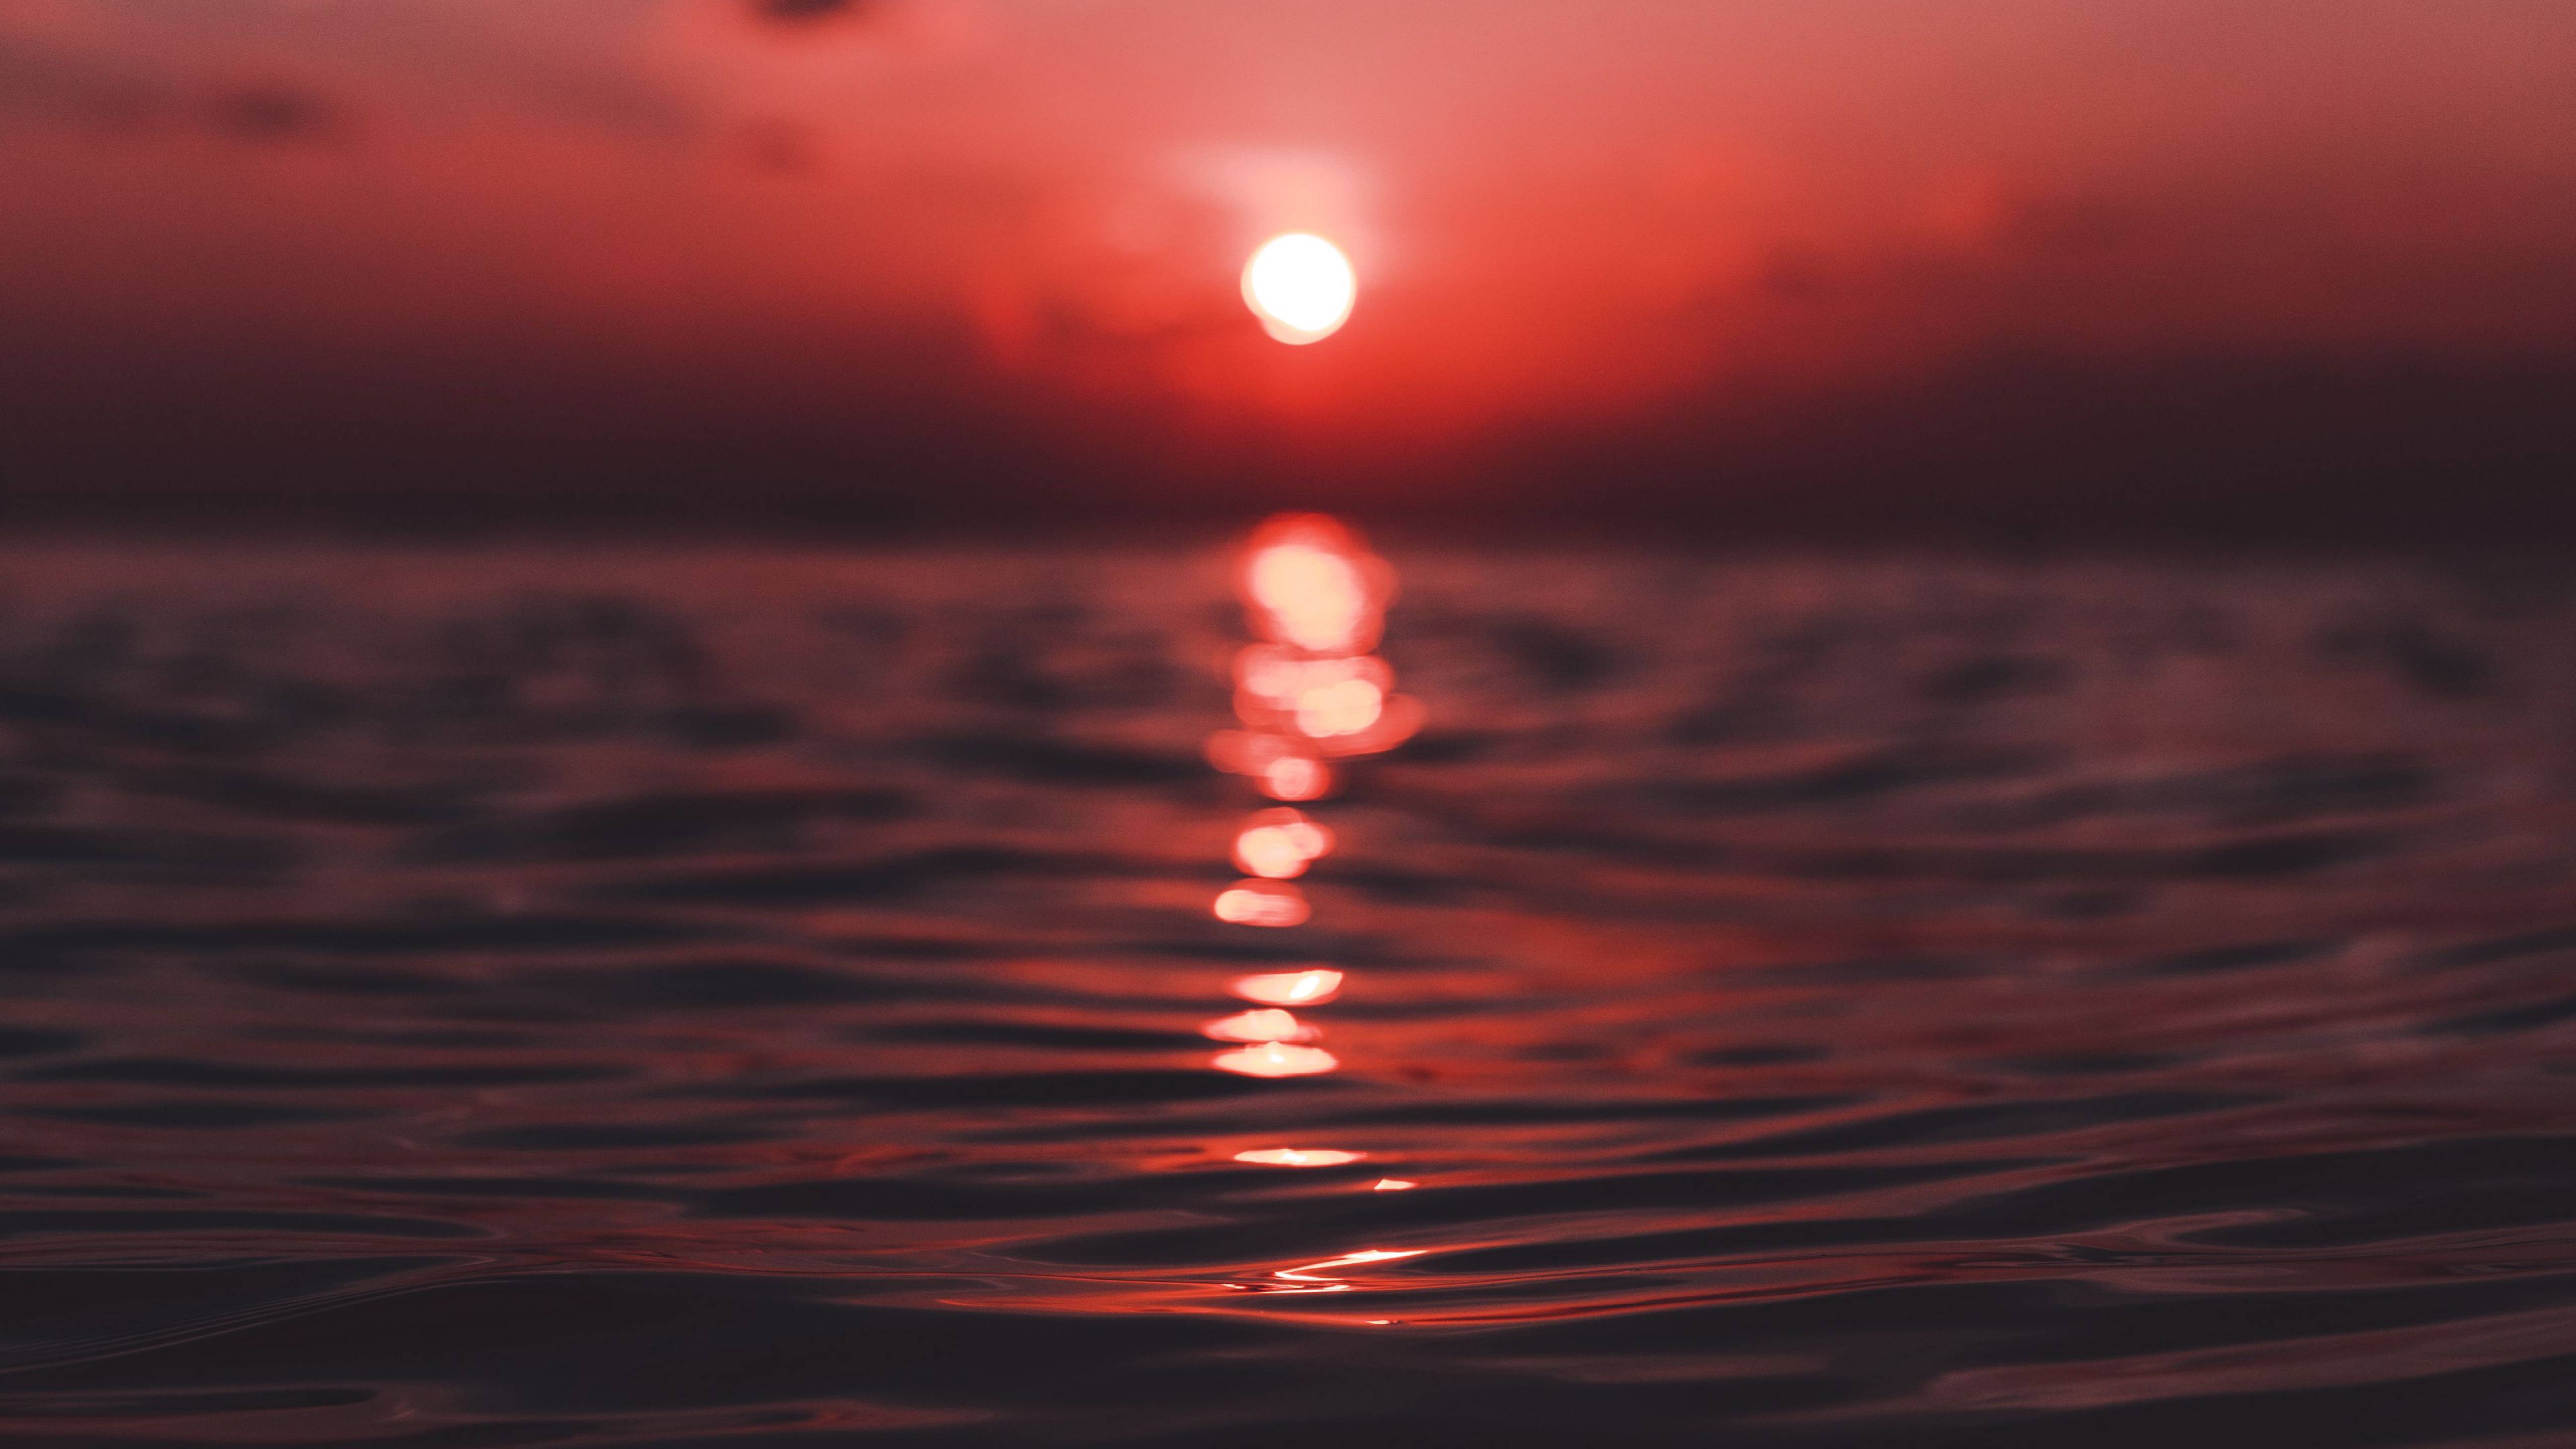 A beautiful sunset over the ocean with the sun setting behind the horizon and reflecting on the water. - Sunset, water